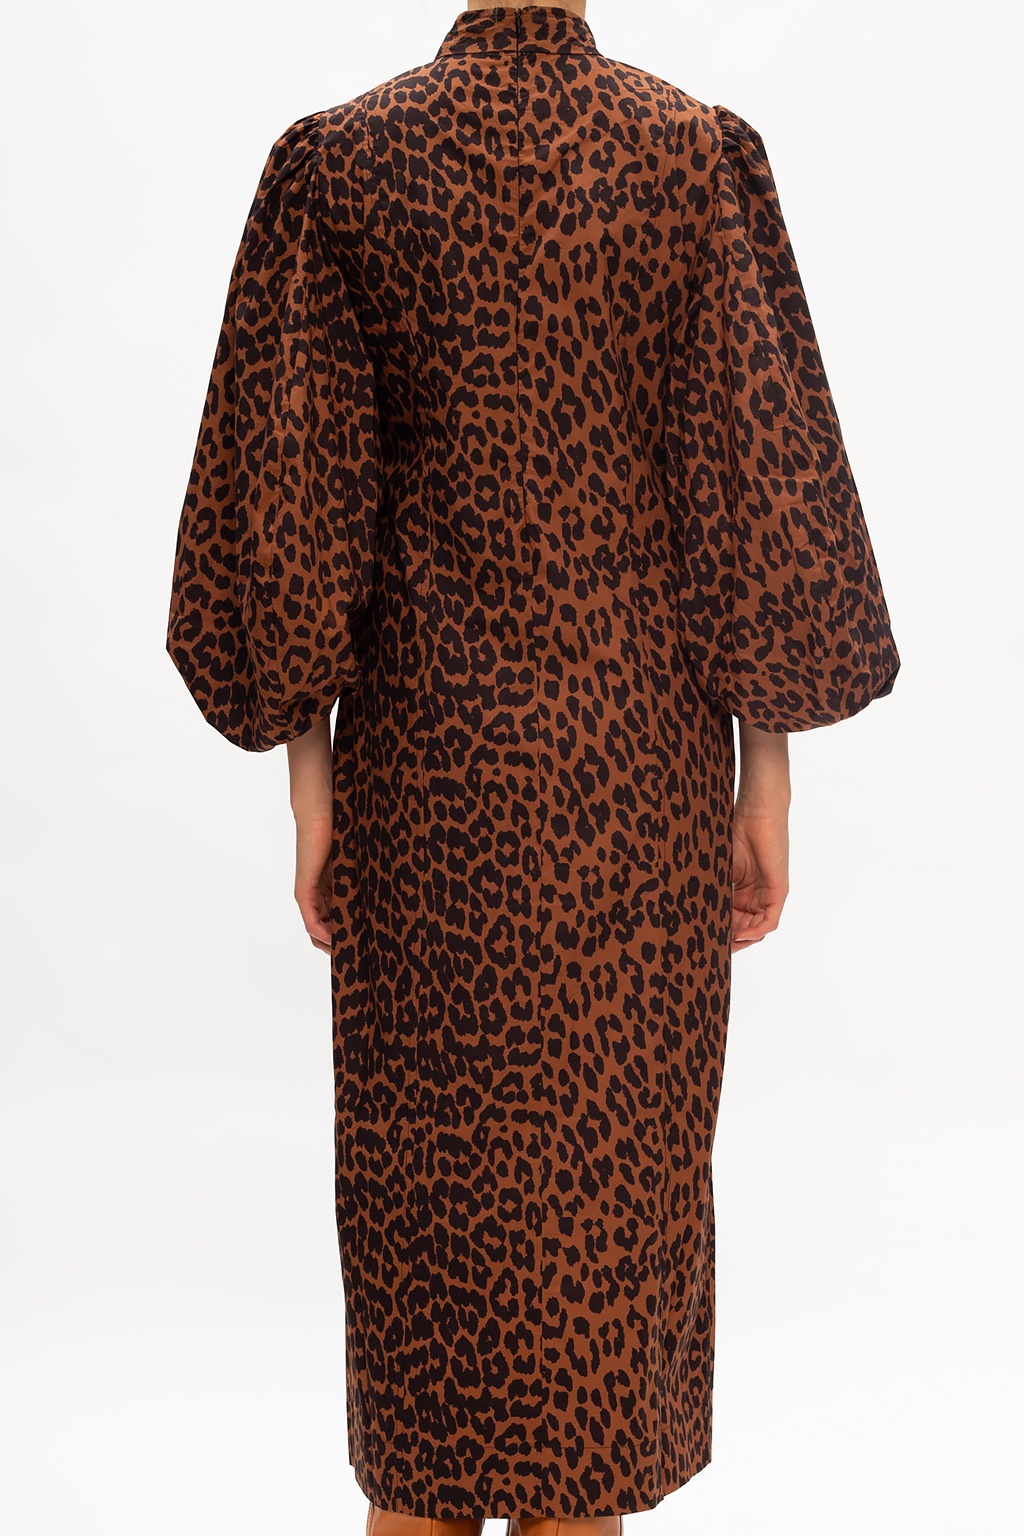 Leopard print dress with band collar ...